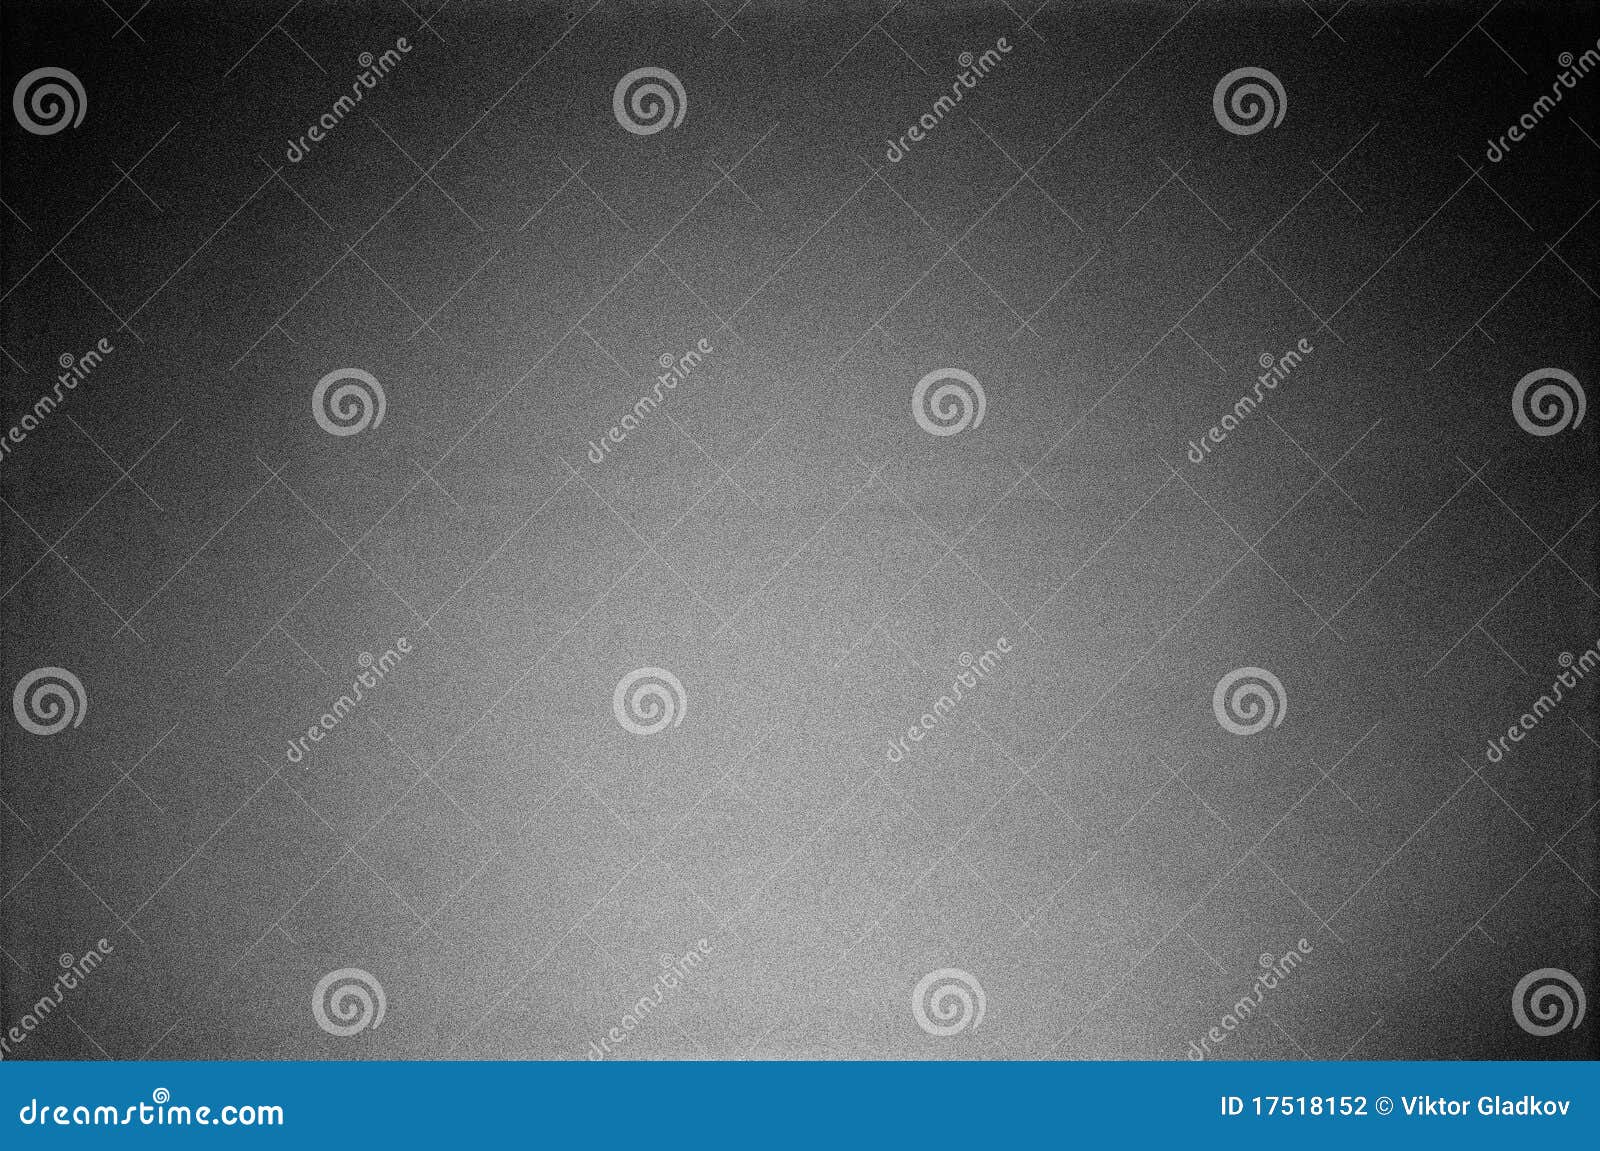 Gray texture stock photo. Image of sample, text, canvas - 17518152